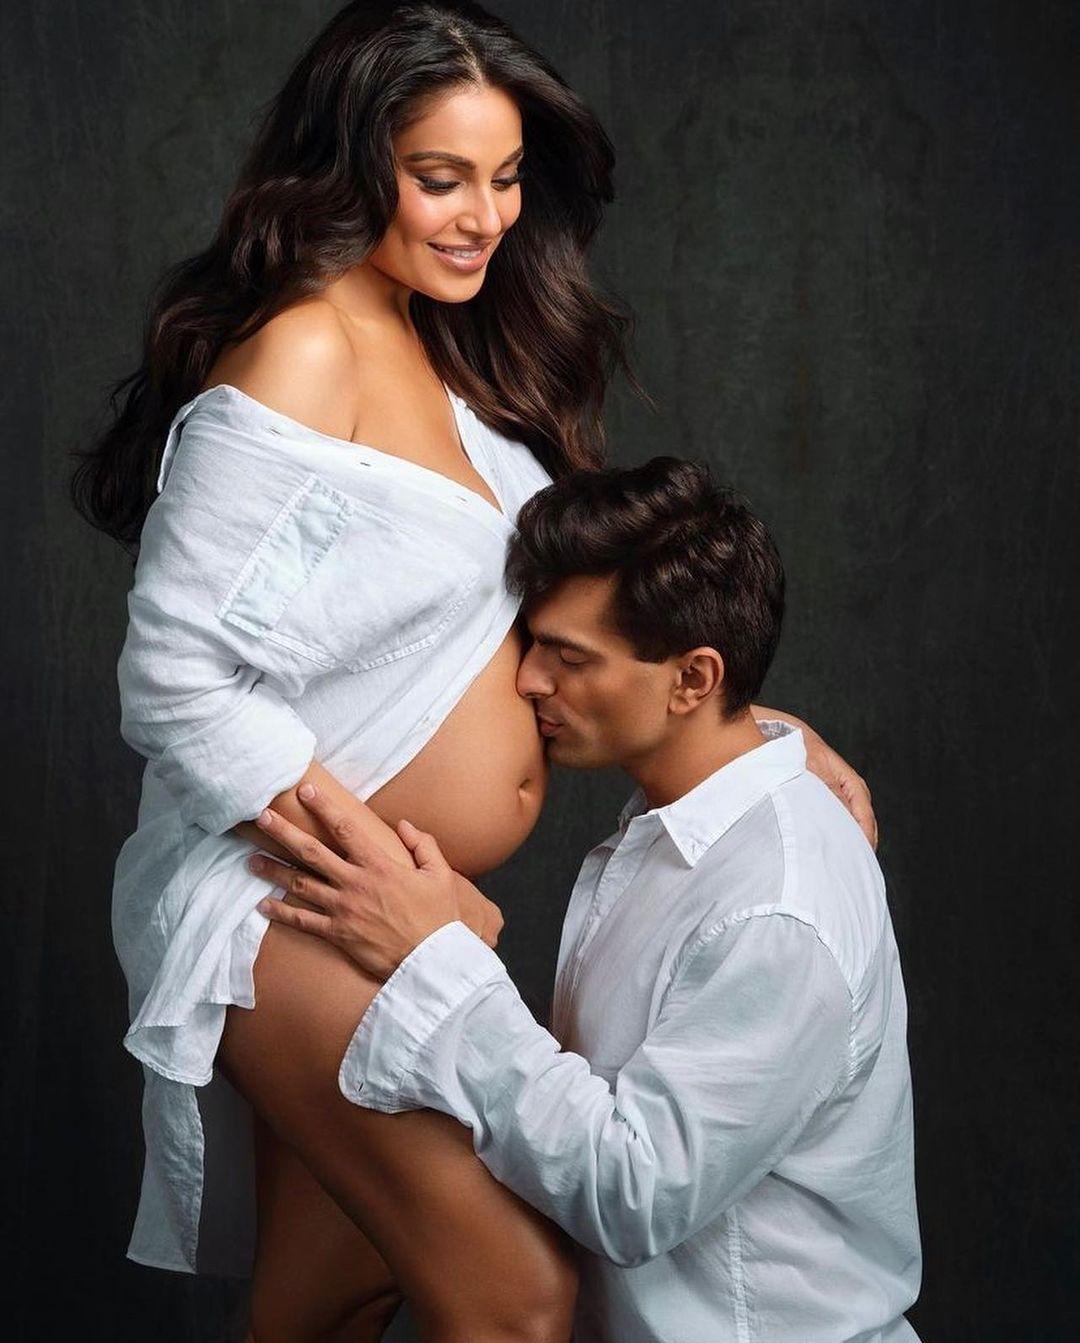 In a heartwarming display of love and anticipation, Bipasha Basu and her doting husband come together for a maternity shoot that melts hearts